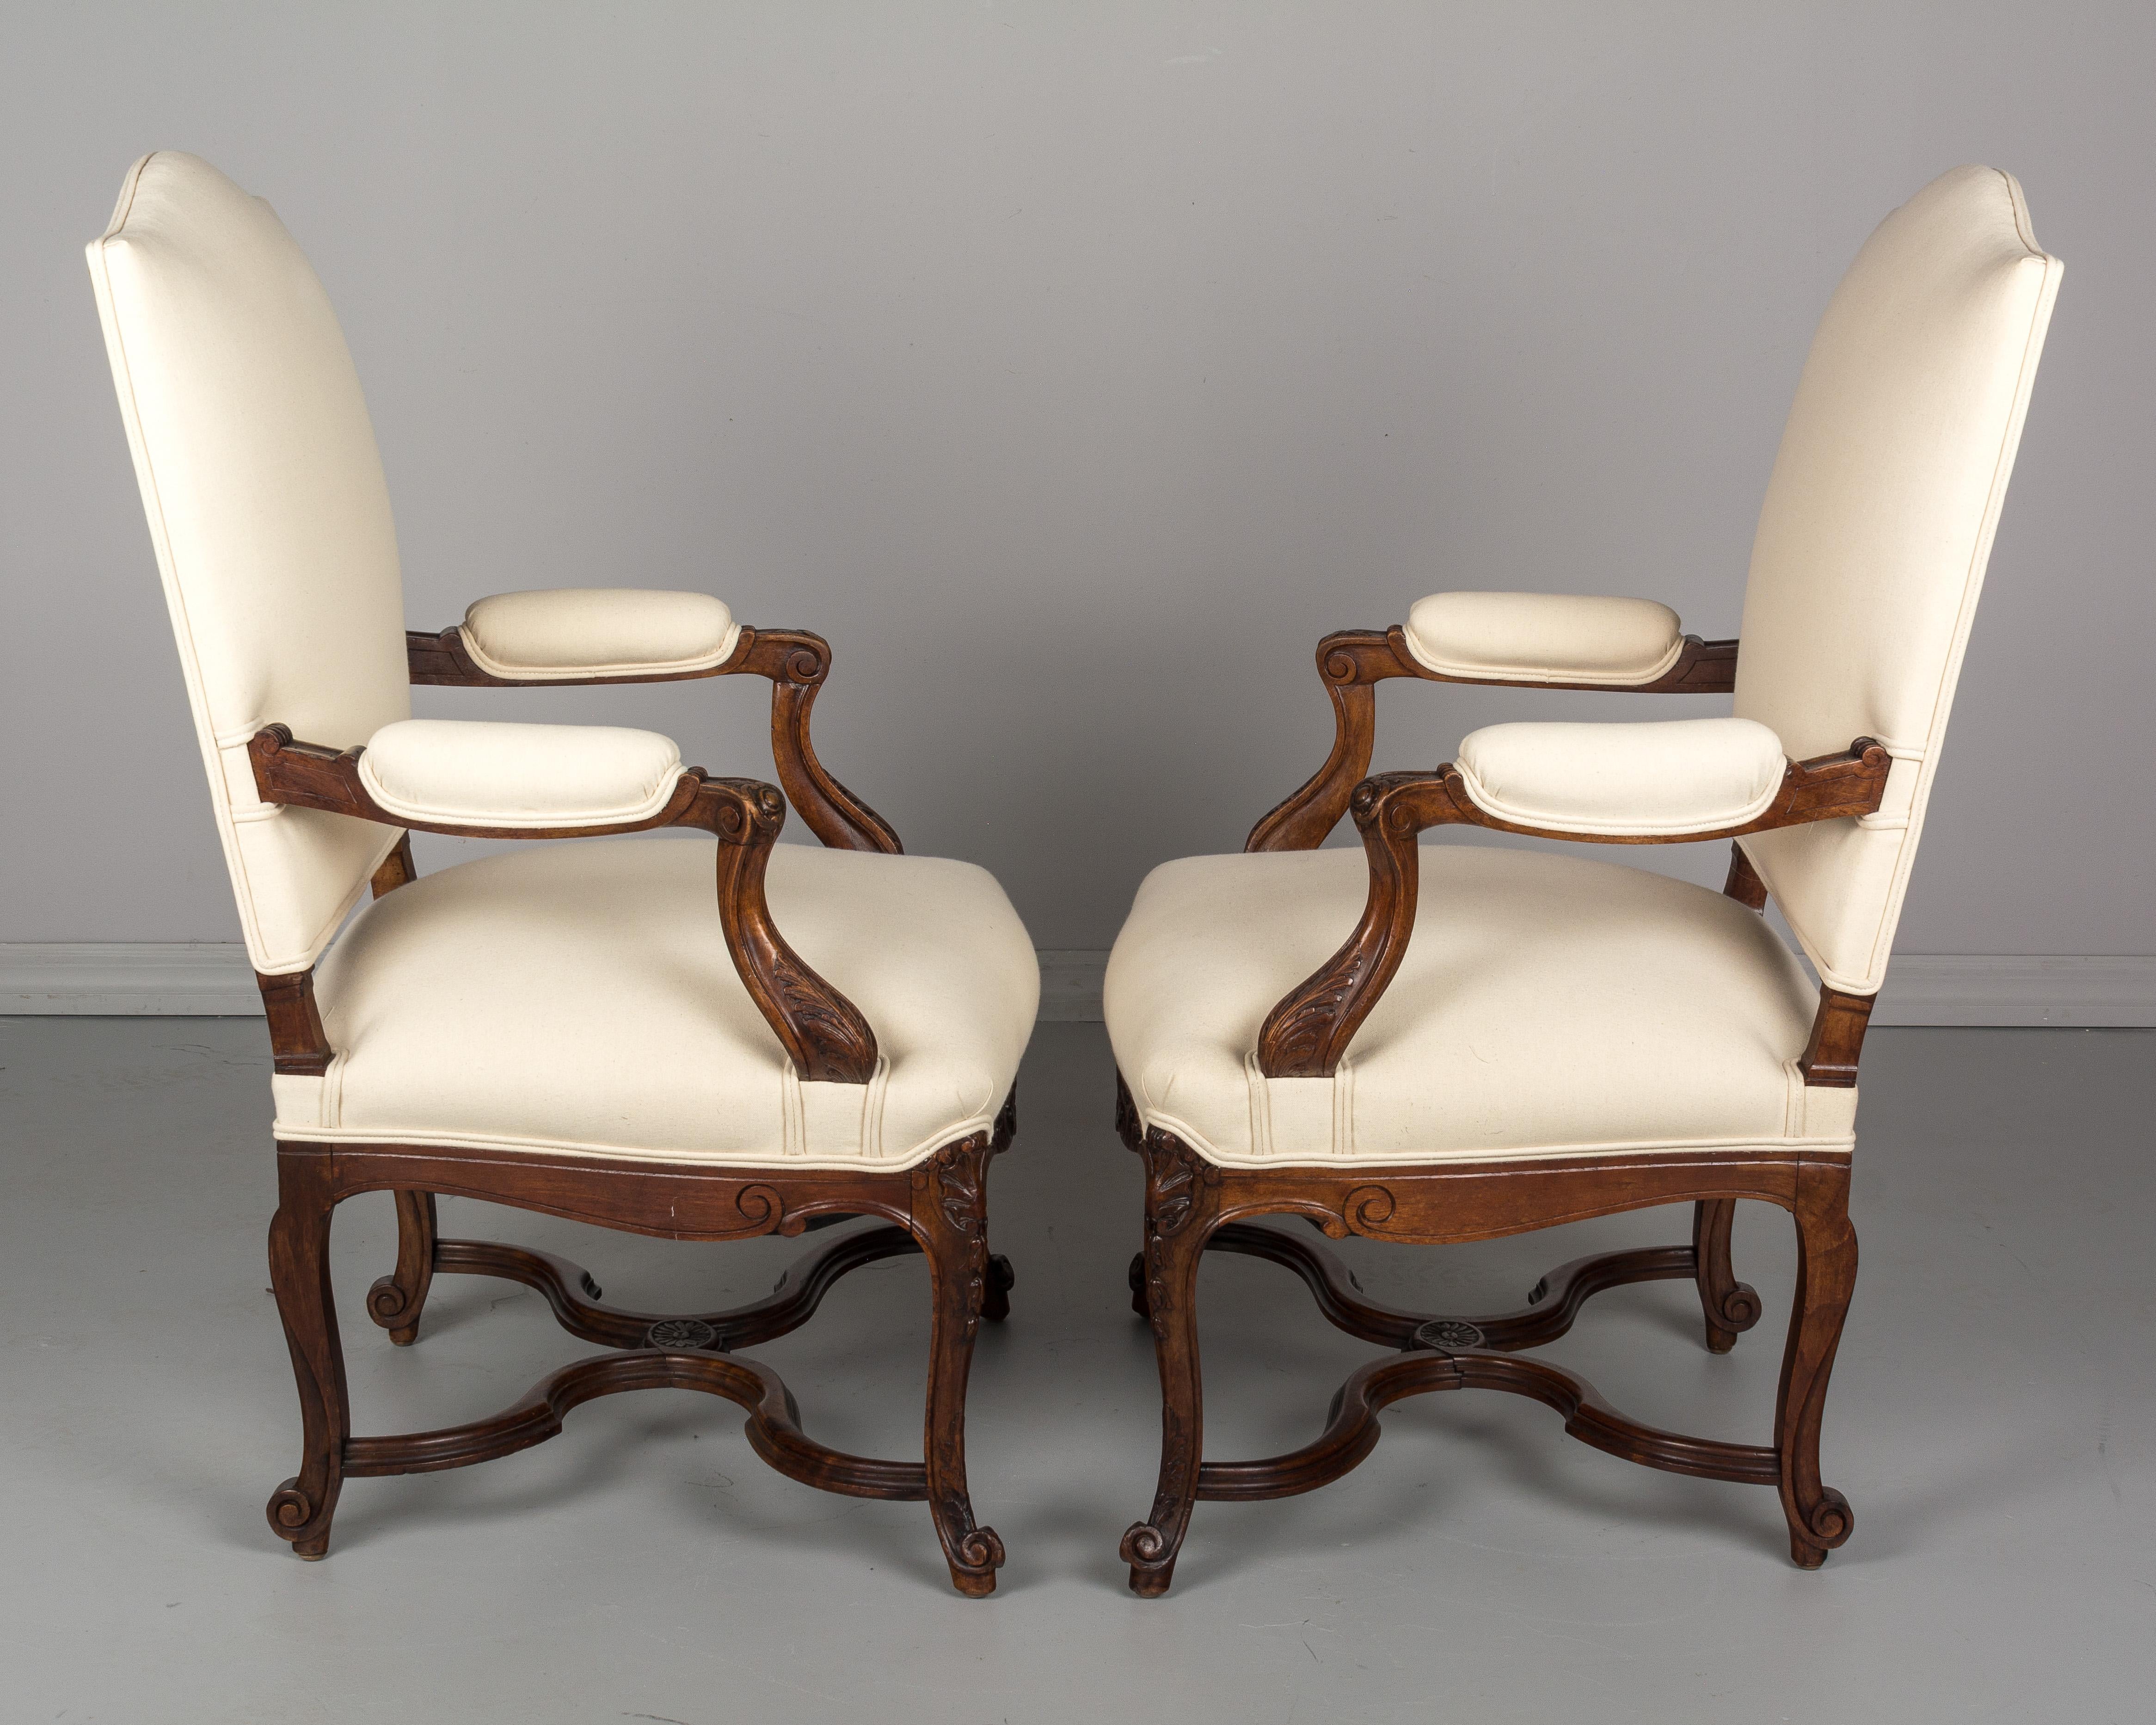 20th Century Pair of French Regency Style Fauteuils or Armchairs